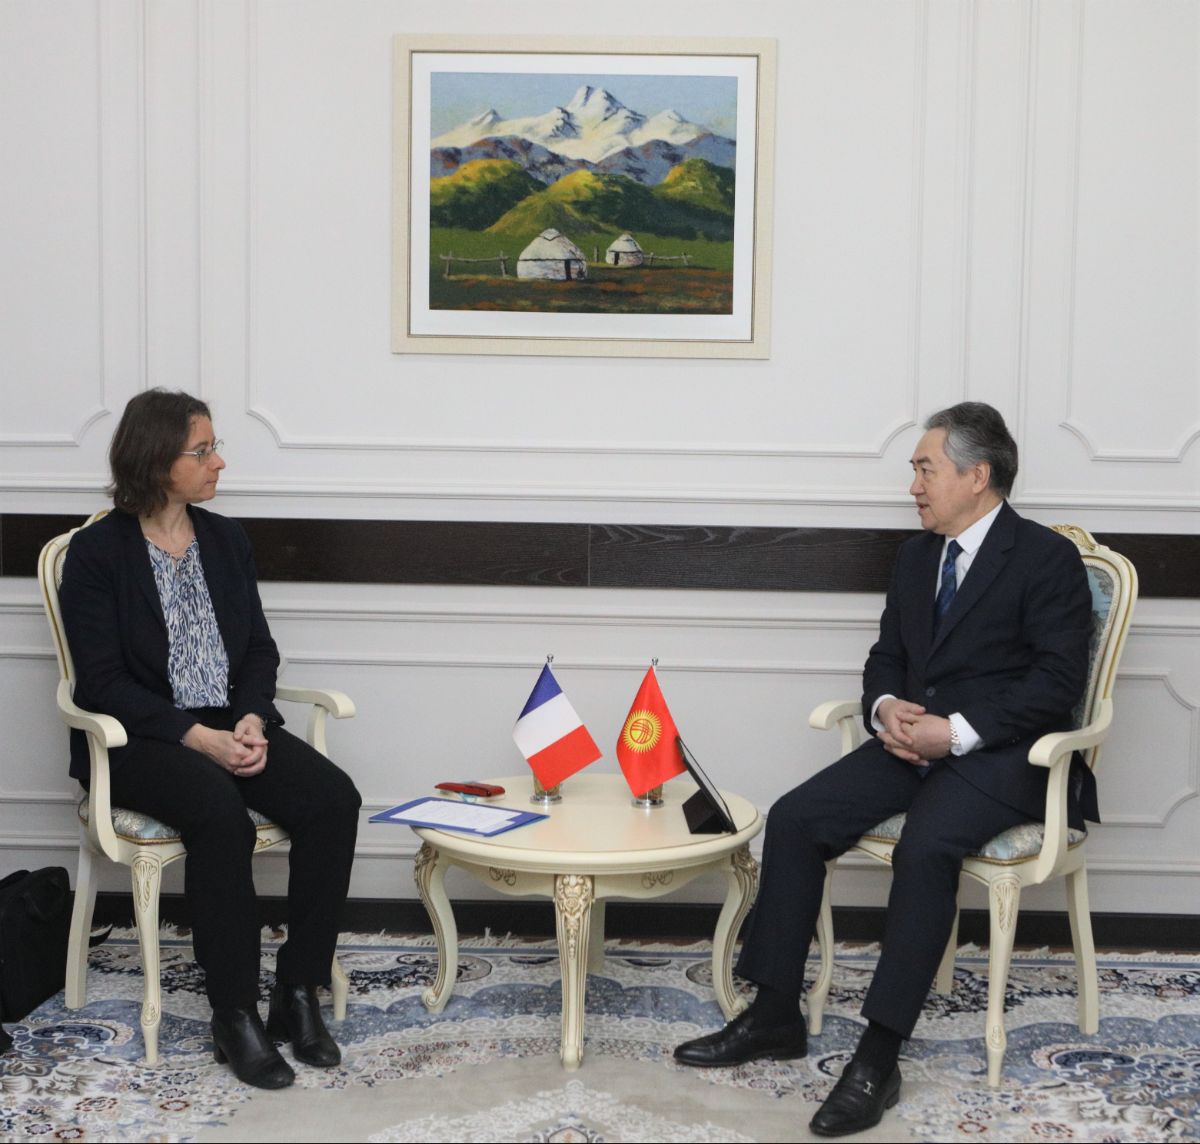 On April 7, 2023, Minister of Foreign Affairs of the Kyrgyz Republic Zheenbek Kulubaev met with Advisor to the French President Isabelle Dumont.

During the meeting, parties exchanged views on relevant issues of bilateral cooperation between Kyrgyzstan and France. In order to further intensify cooperation, Minister Kulubaev noted the importance of maintaining active political contacts, increasing the volume of mutual trade, promoting joint projects in various areas of mutual interest.

Minister Kulubaev emphasized the prospects of the country's hydropower potential and outlined the importance of attracting French investors and specialists to projects in this area. Mutual interest was expressed in continuing cooperation on projects with «Electricité de France».

The parties also discussed relevant issues of the regional and international agenda.